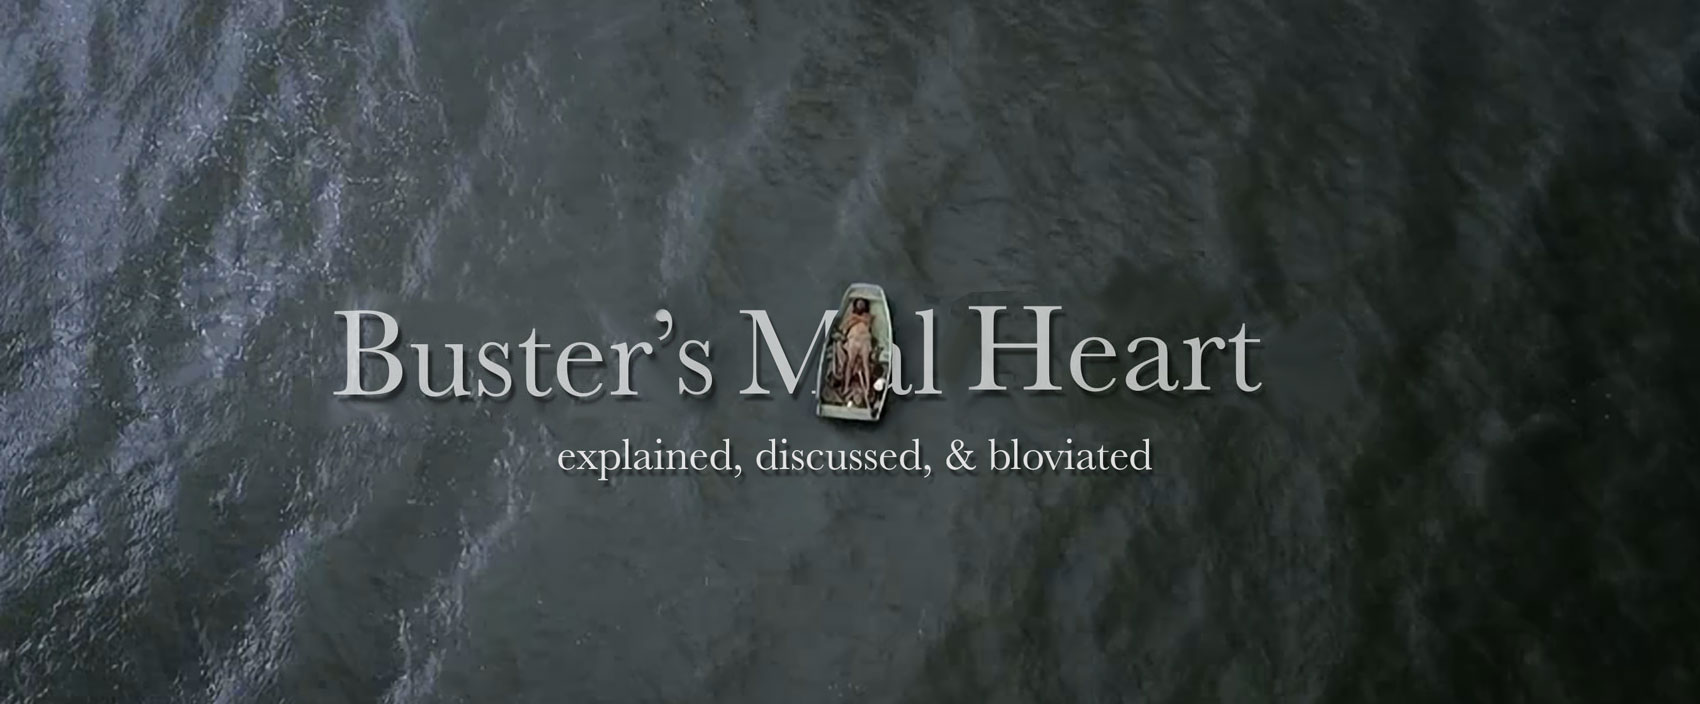 Someone Please Explain the Movie Buster's Mal Heart - Taylor Holmes inc.